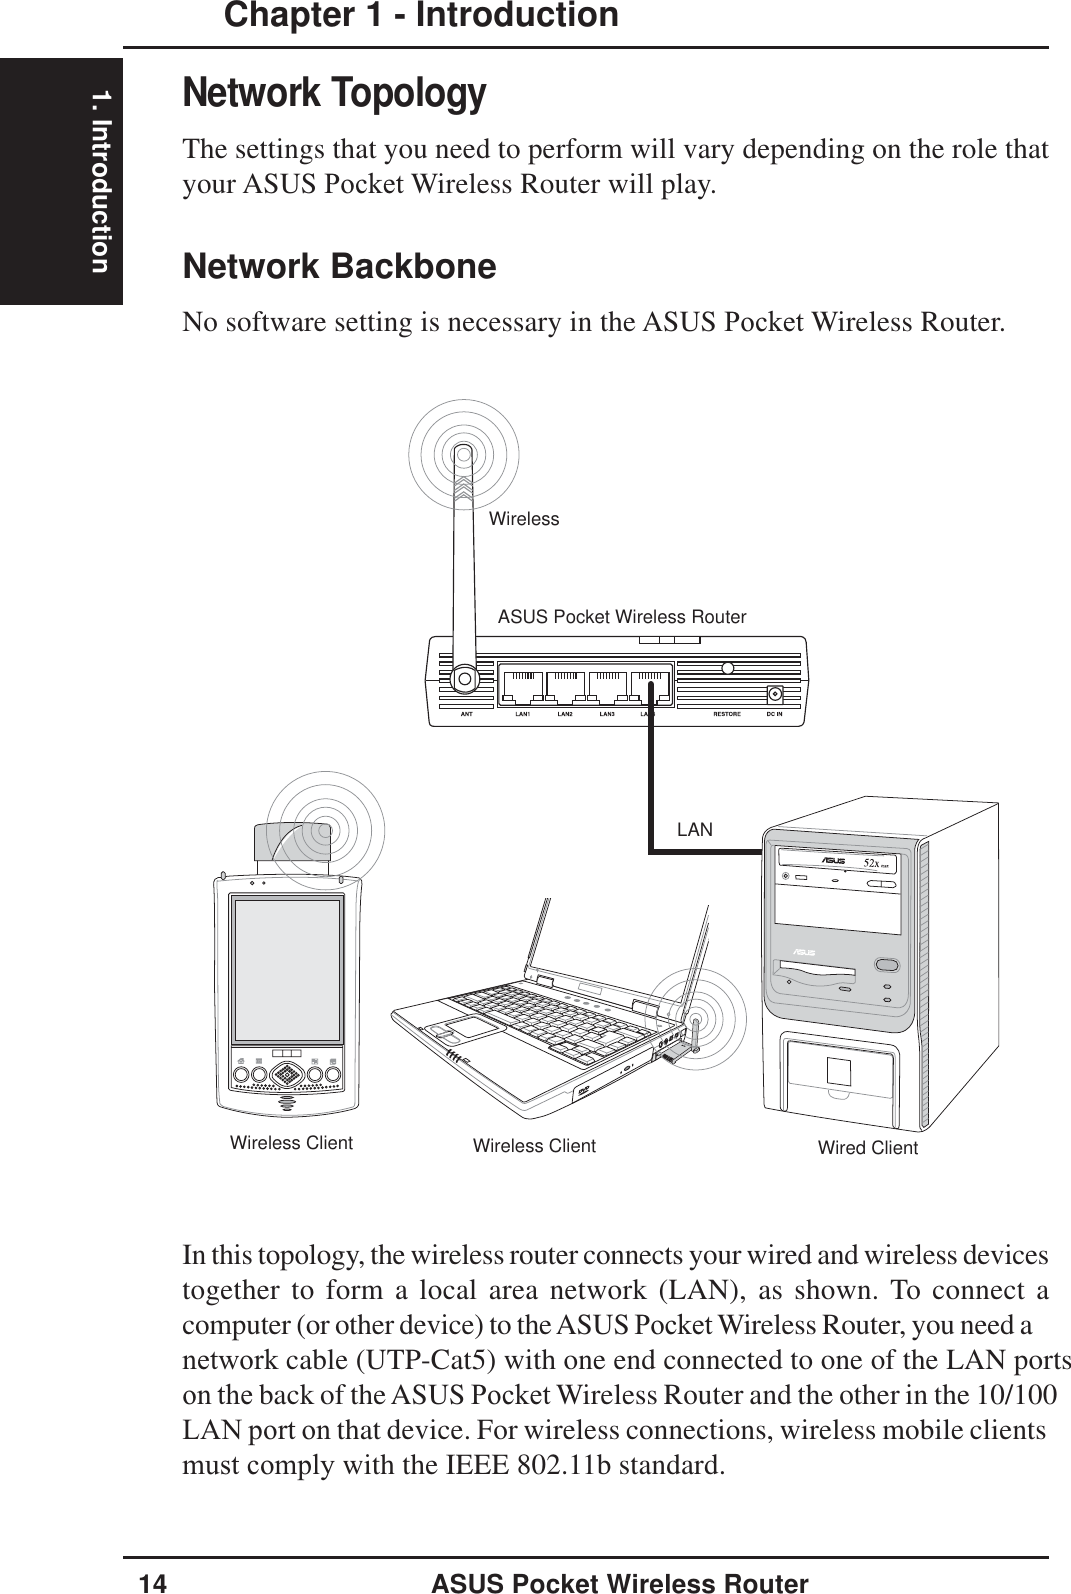 1. IntroductionChapter 1 - Introduction14 ASUS Pocket Wireless RouterASUS Pocket Wireless RouterWireless ClientWireless ClientWirelessLANWired ClientNetwork TopologyThe settings that you need to perform will vary depending on the role thatyour ASUS Pocket Wireless Router will play.Network BackboneNo software setting is necessary in the ASUS Pocket Wireless Router.In this topology, the wireless router connects your wired and wireless devicestogether to form a local area network (LAN), as shown. To connect acomputer (or other device) to theASUS Pocket Wireless Router, you need a network cable (UTP-Cat5) with one end connected to one of the LAN portson the back of theASUS Pocket Wireless Router and the other in the 10/100 LAN port on that device. For wireless connections, wireless mobile clients must comply with the IEEE 802.11b standard.